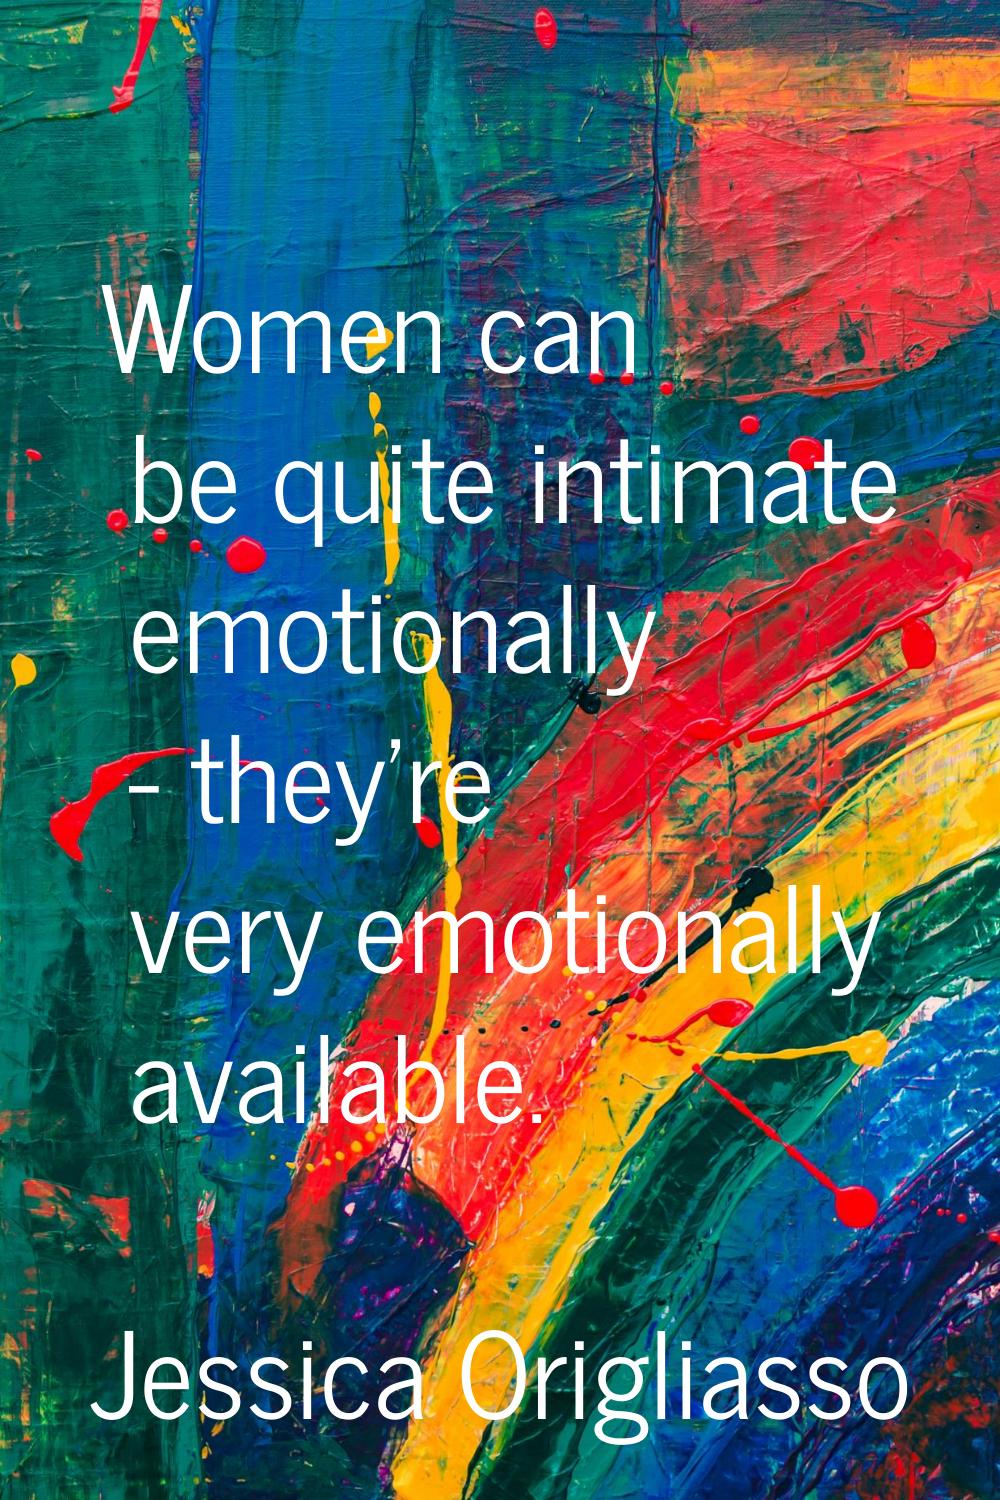 Women can be quite intimate emotionally - they're very emotionally available.